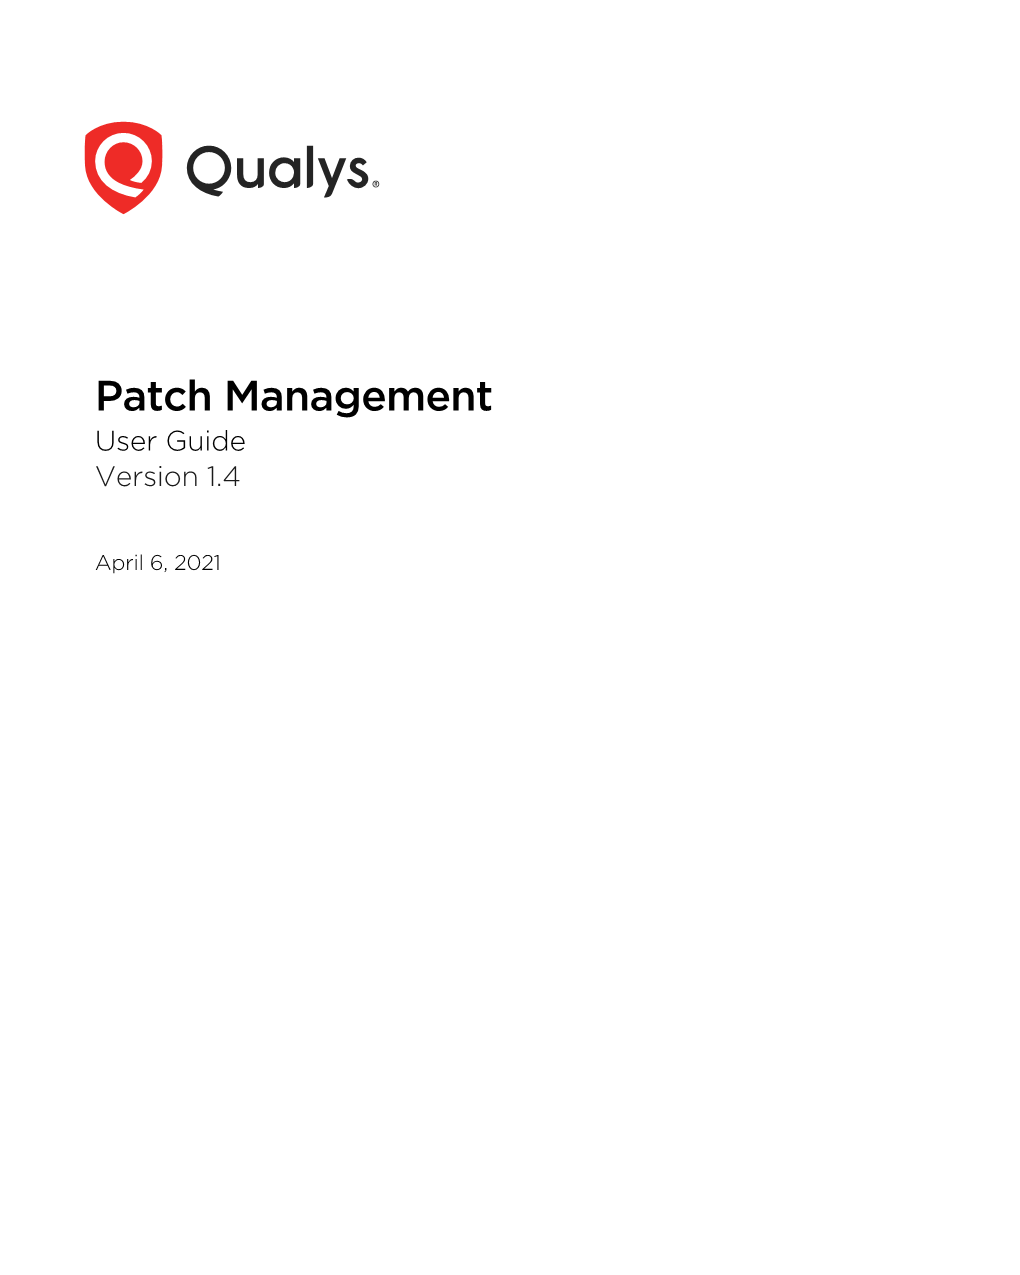 Qualys Patch Management User Guide